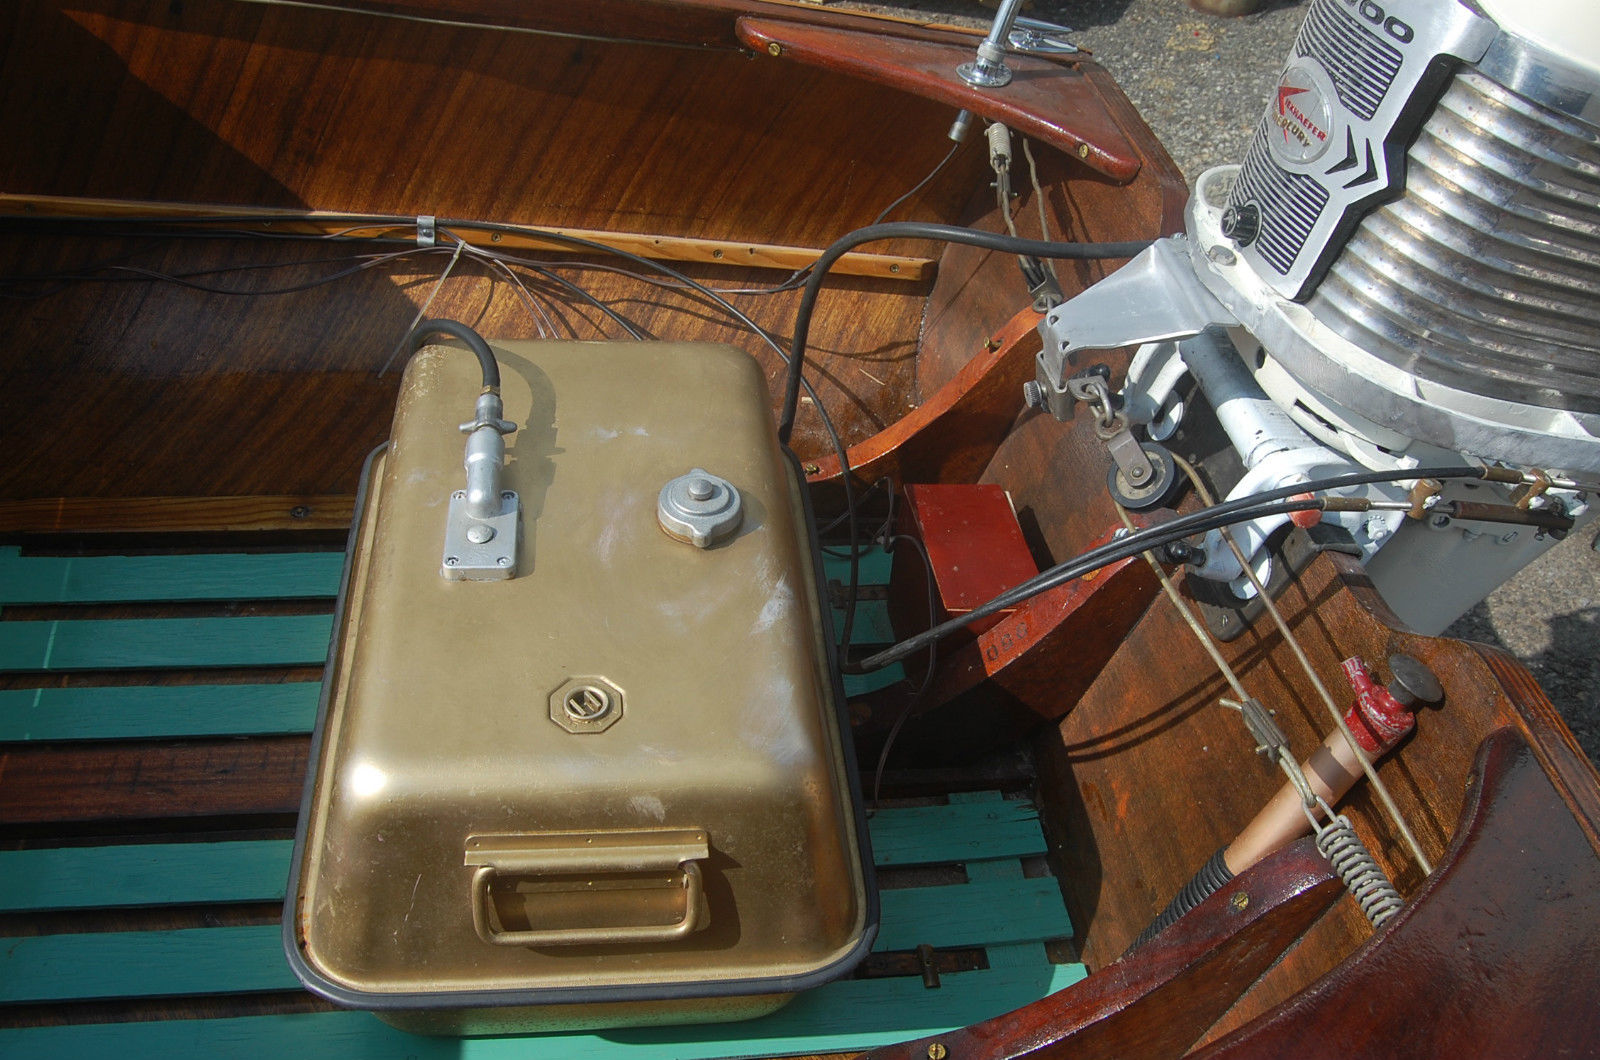 Whirlwind 1956 for sale for $3,900 - Boats-from-USA.com